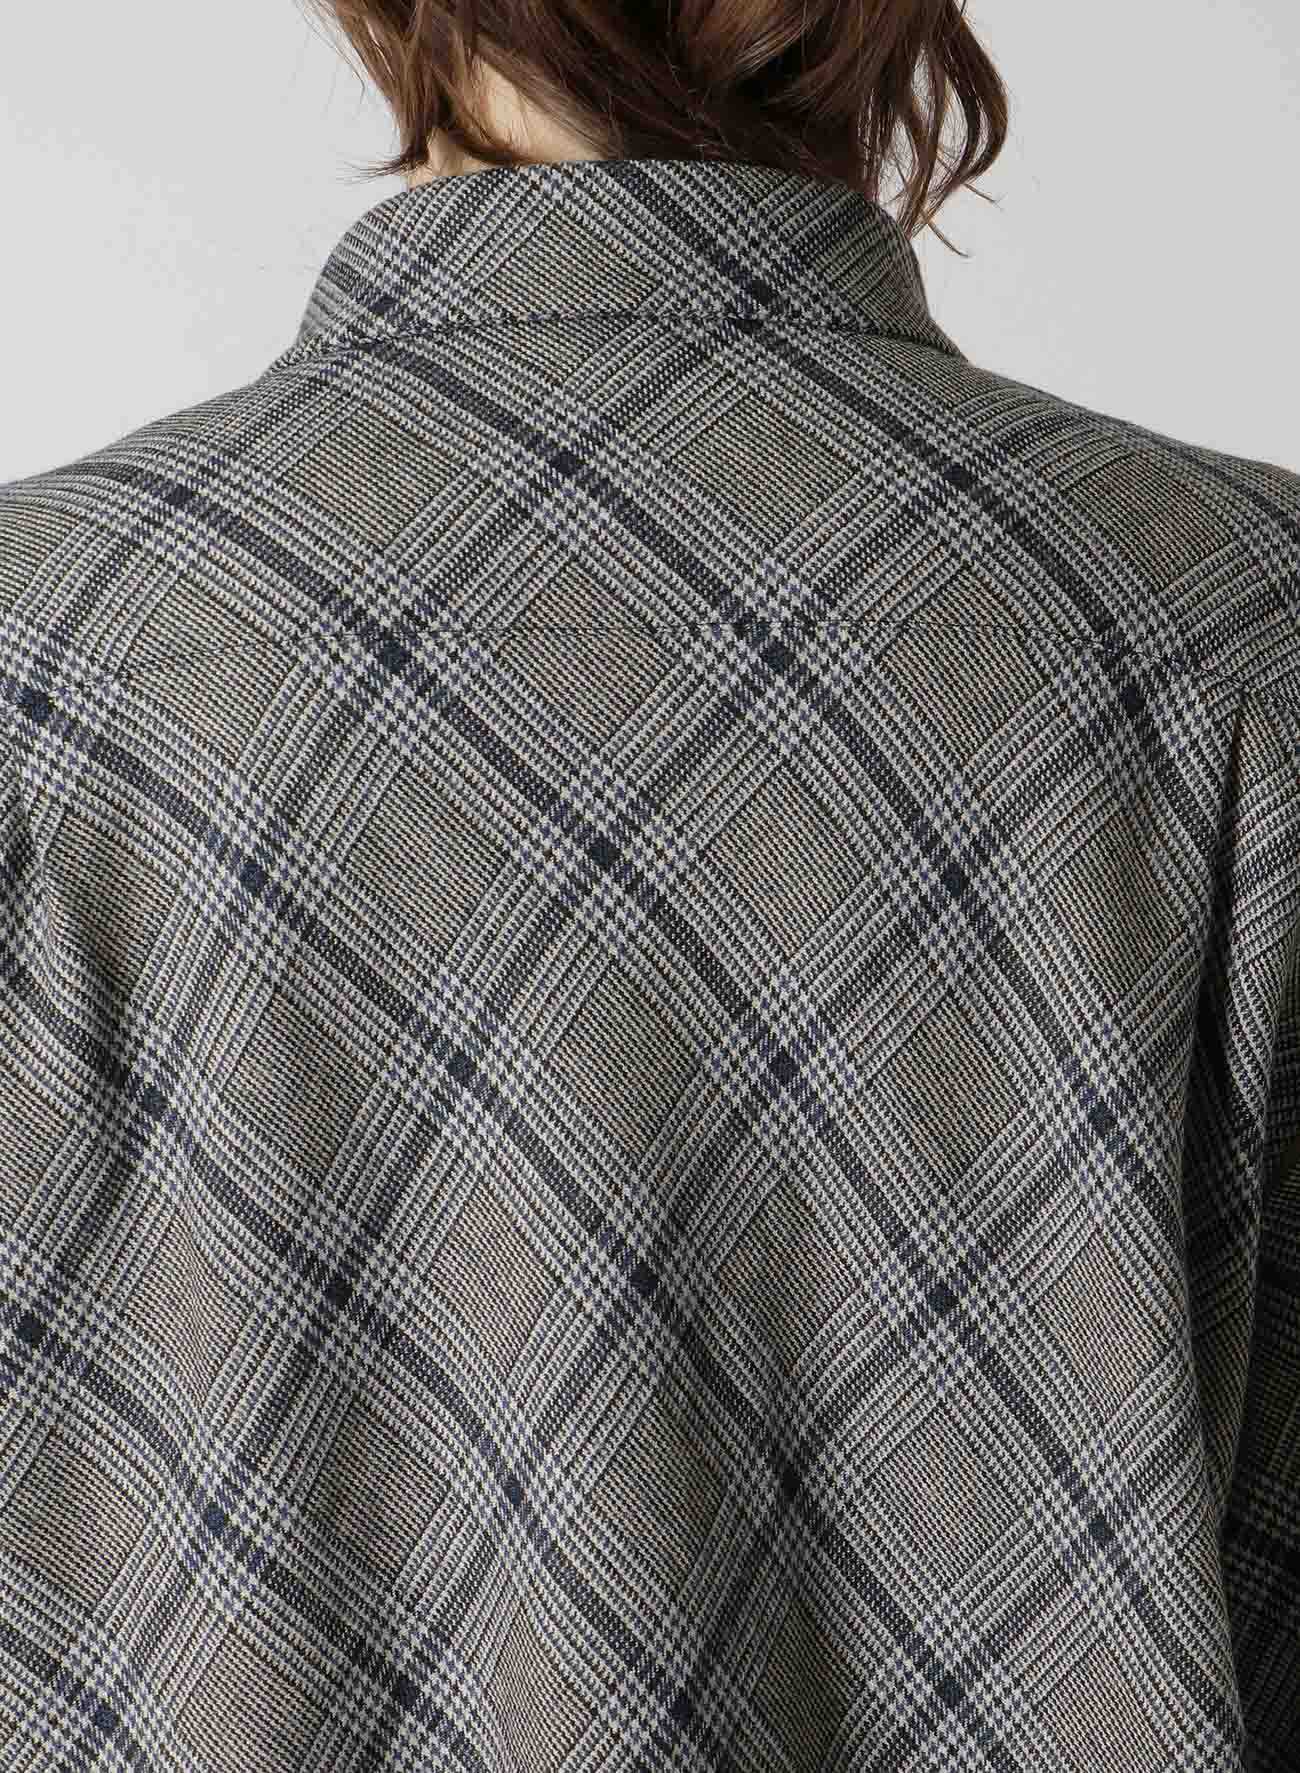 WOOL HOUNDSTOOTH CHECK DECONSTRUCTED SLEEVE DETAIL SHIRT